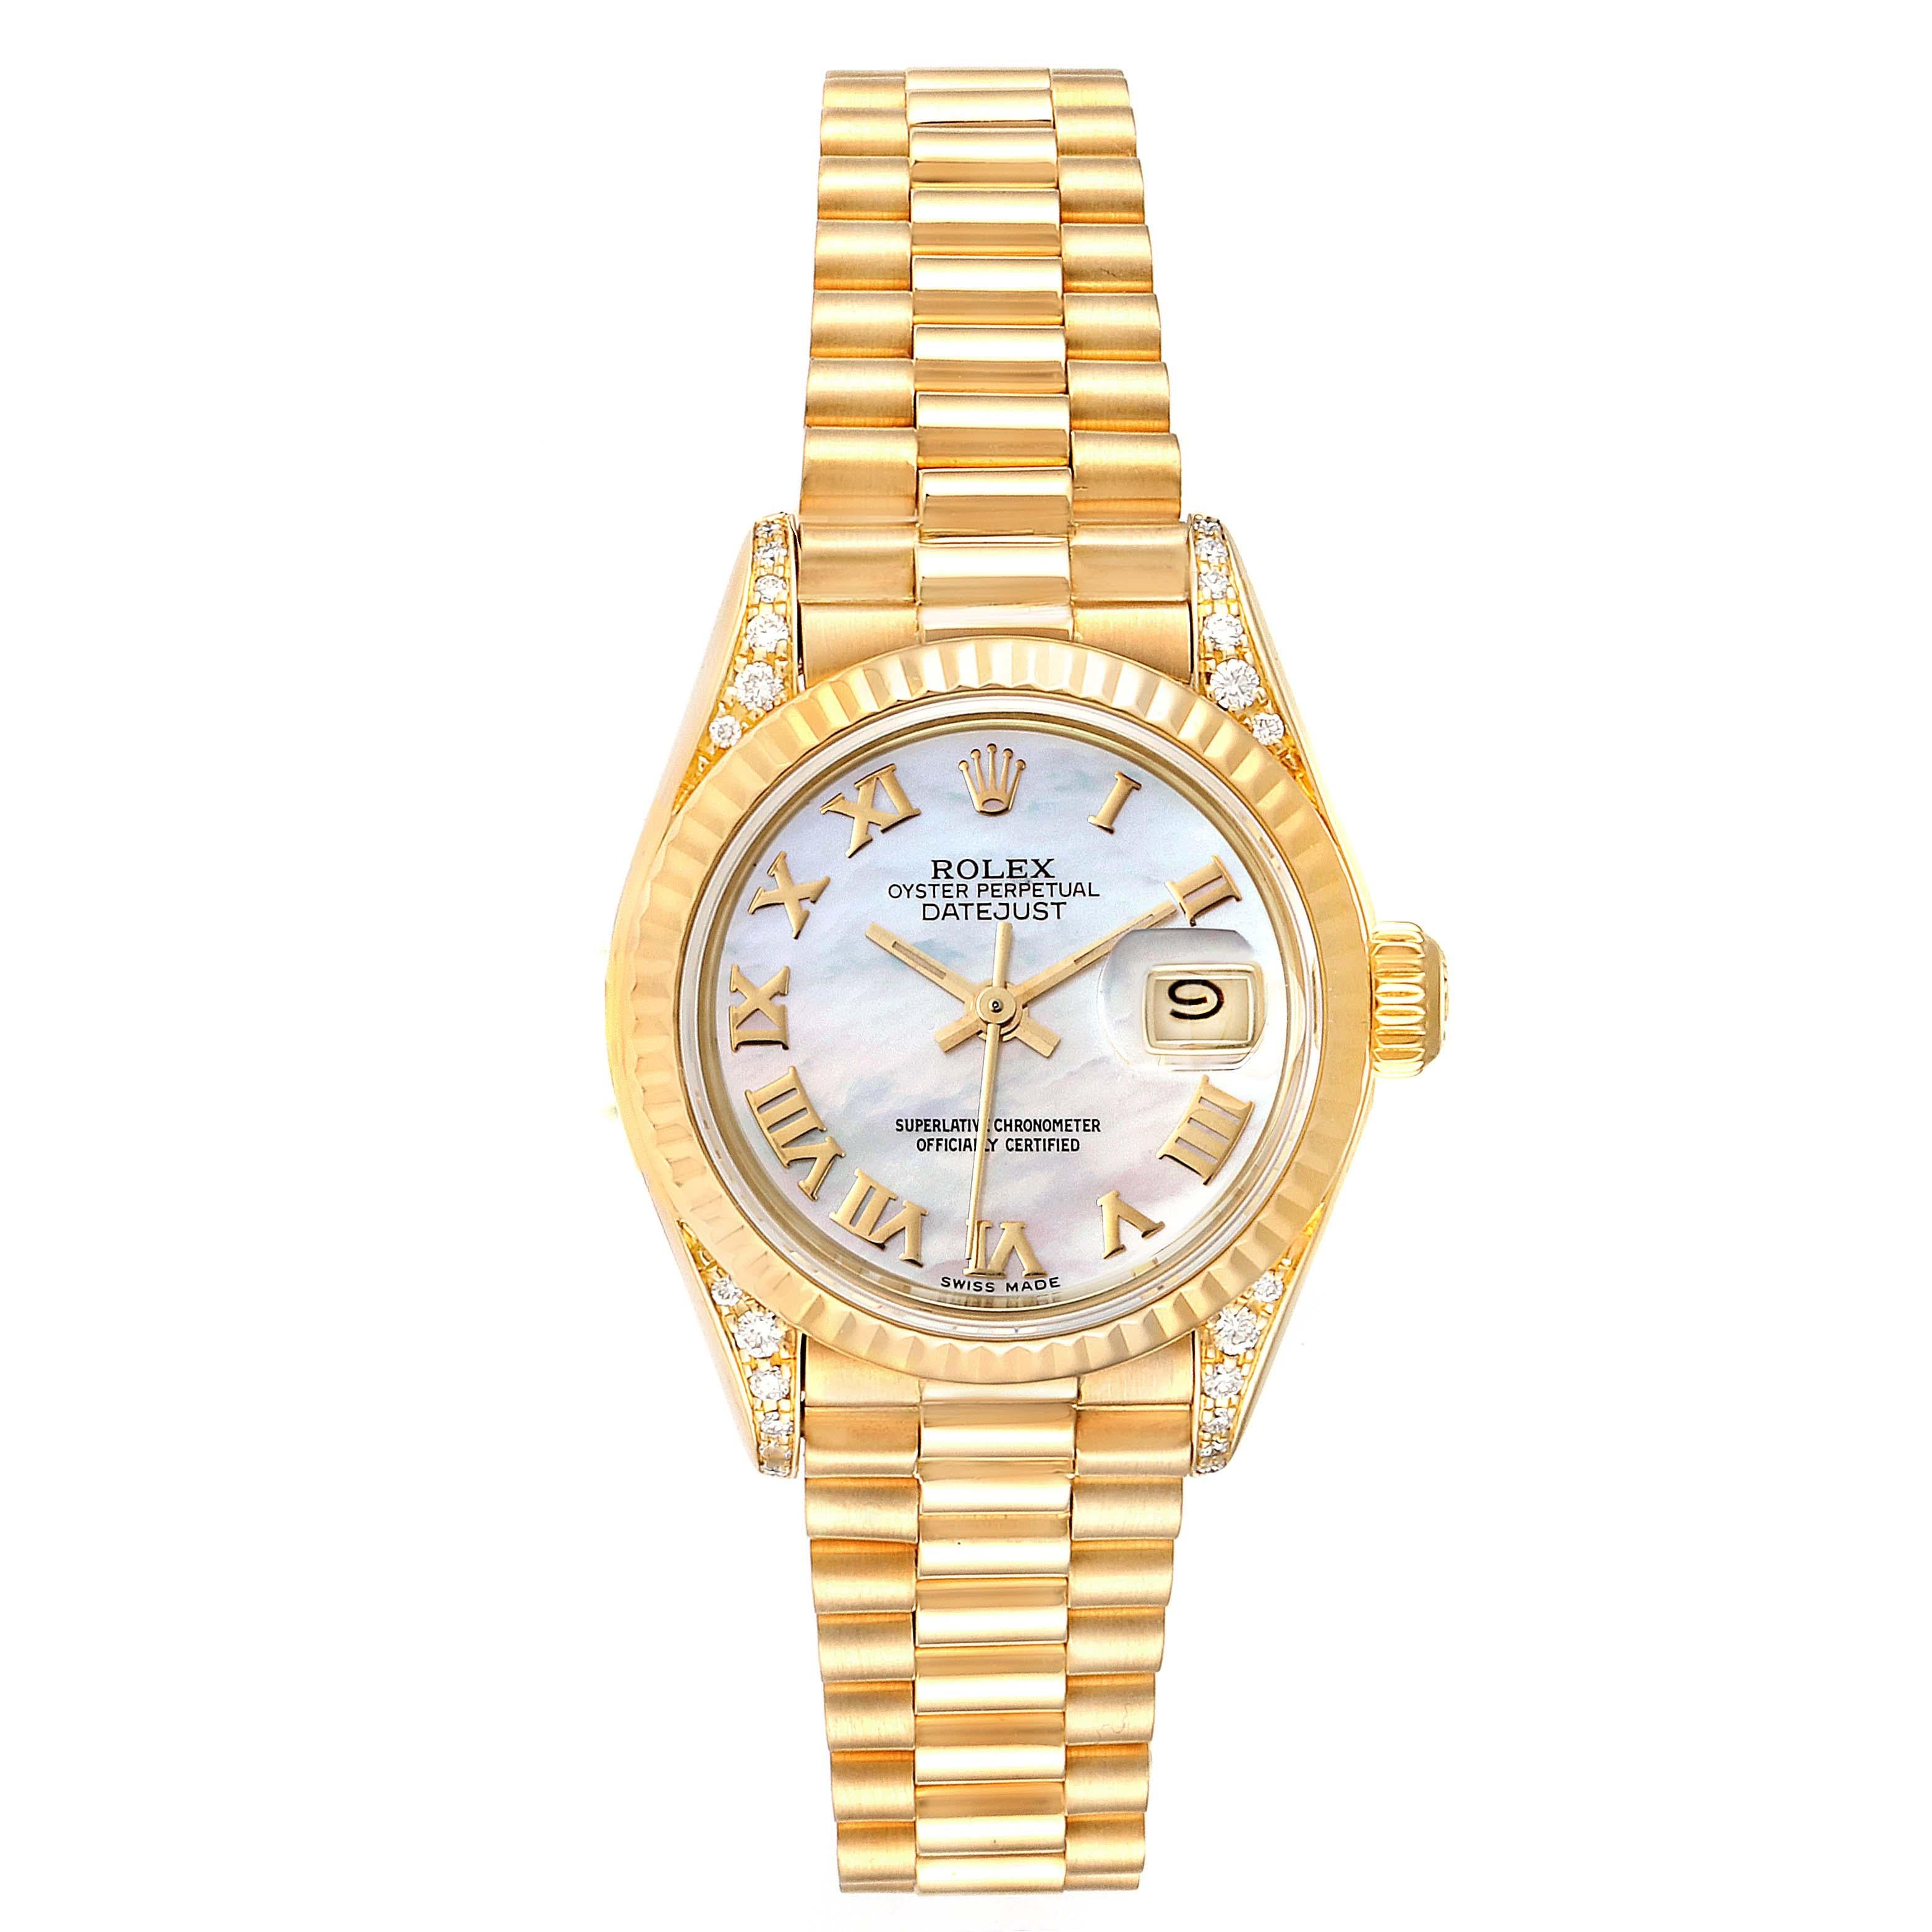 Rolex President Datejust 18K Yellow Gold Diamond Watch 69188. Officially certified chronometer self-winding movement. 18k yellow gold oyster case 26.0 mm in diameter. Rolex logo on a crown. Original Rolex factory diamond lugs. 18k yellow gold fluted